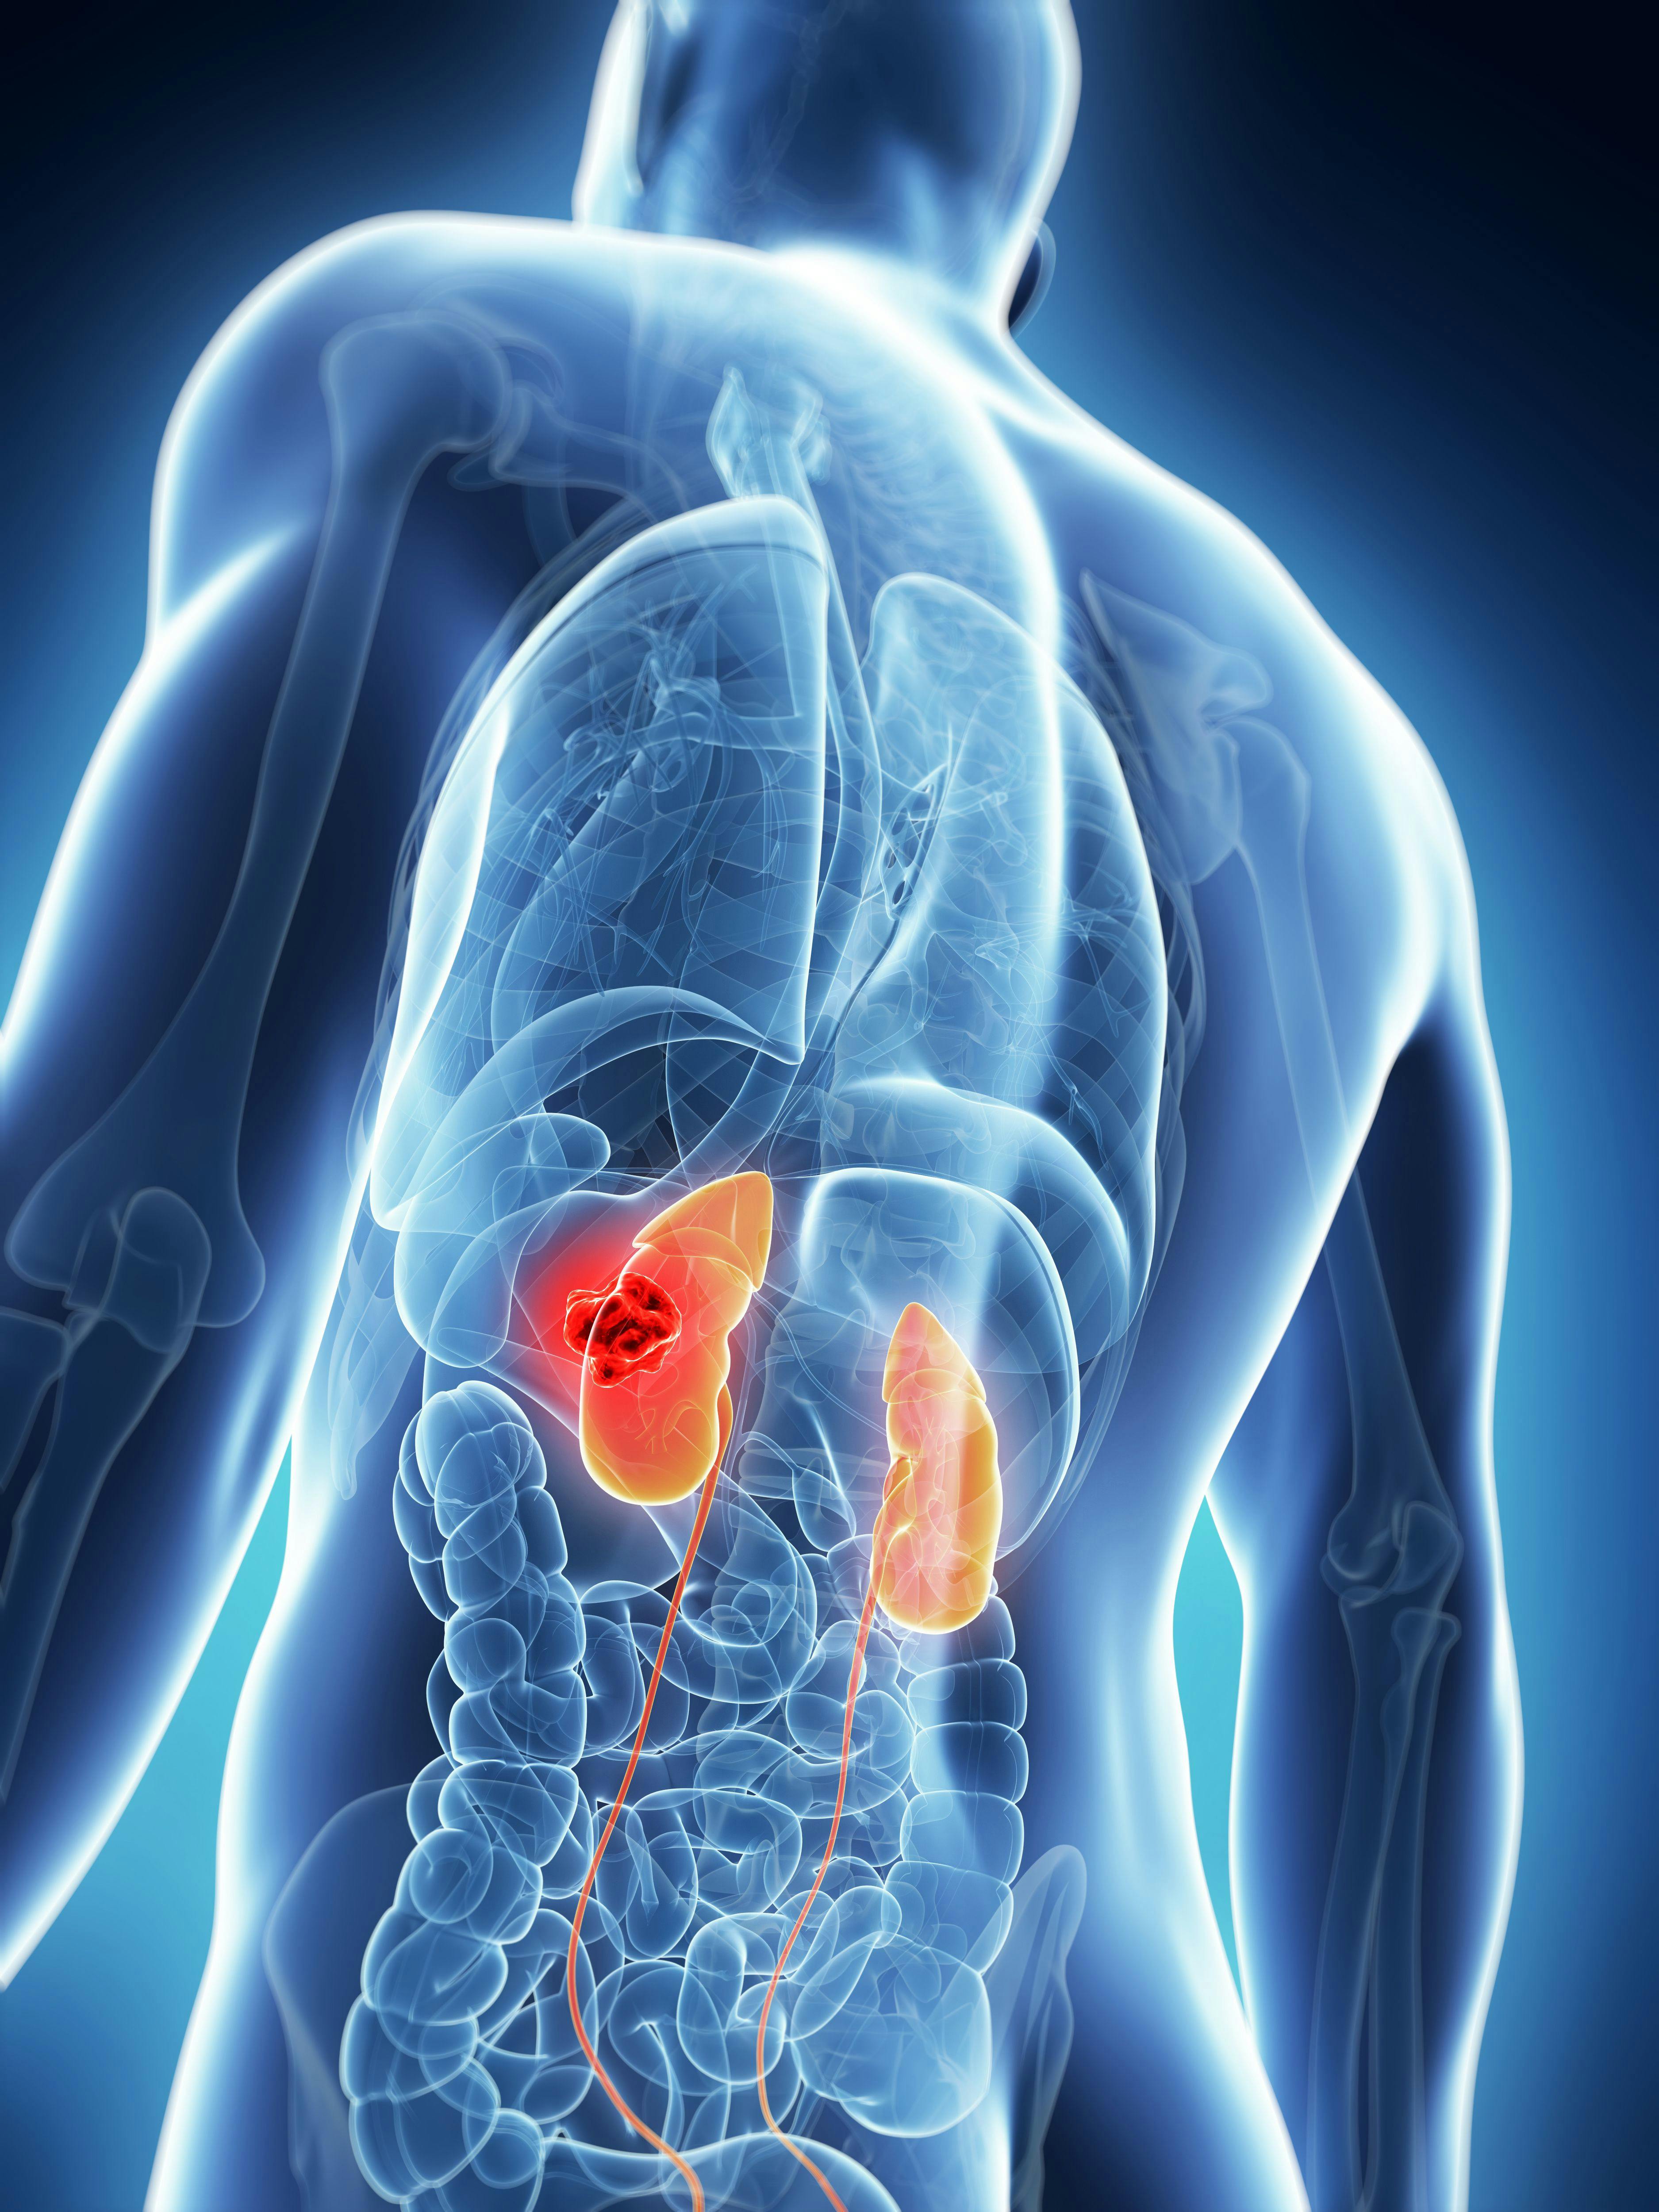 Findings from the phase 3 KEYNOTE-564 trial support adjuvant pembrolizumab following nephrectomy as a standard-of-care treatment for patients with clear cell renal cell carcinoma.